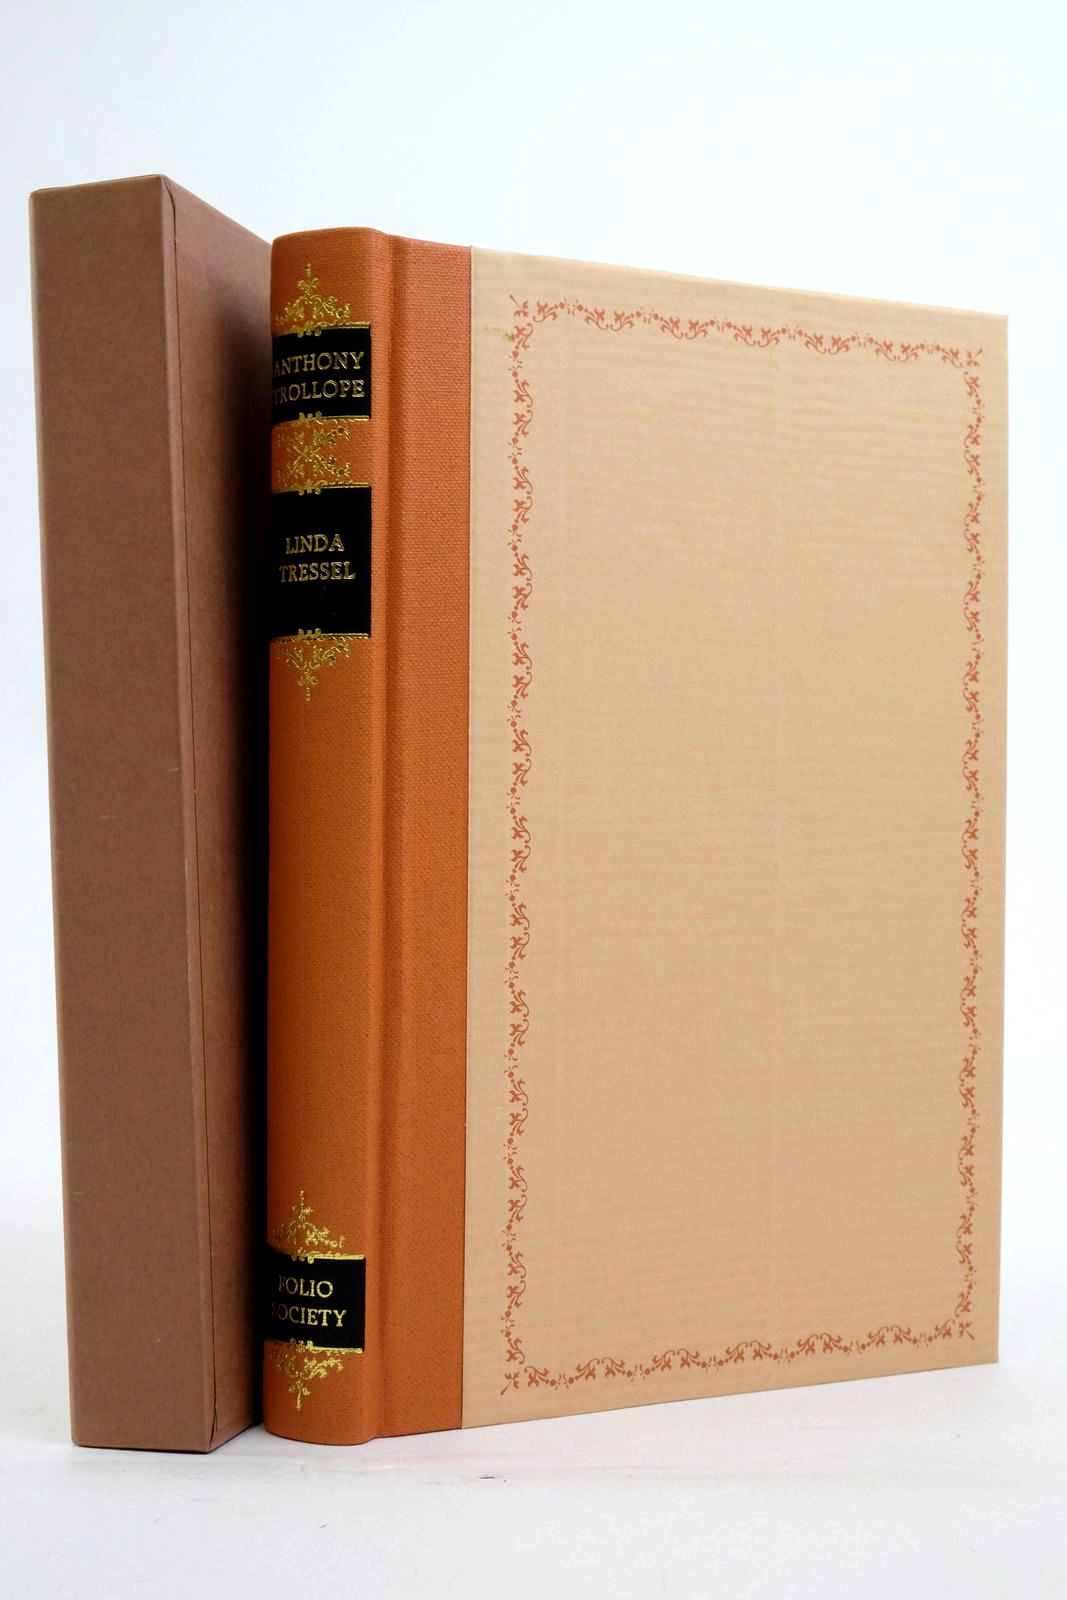 Photo of LINDA TRESSEL written by Trollope, Anthony Trollope, Joanna illustrated by Tourret, Shirley published by Folio Society (STOCK CODE: 2138198)  for sale by Stella & Rose's Books